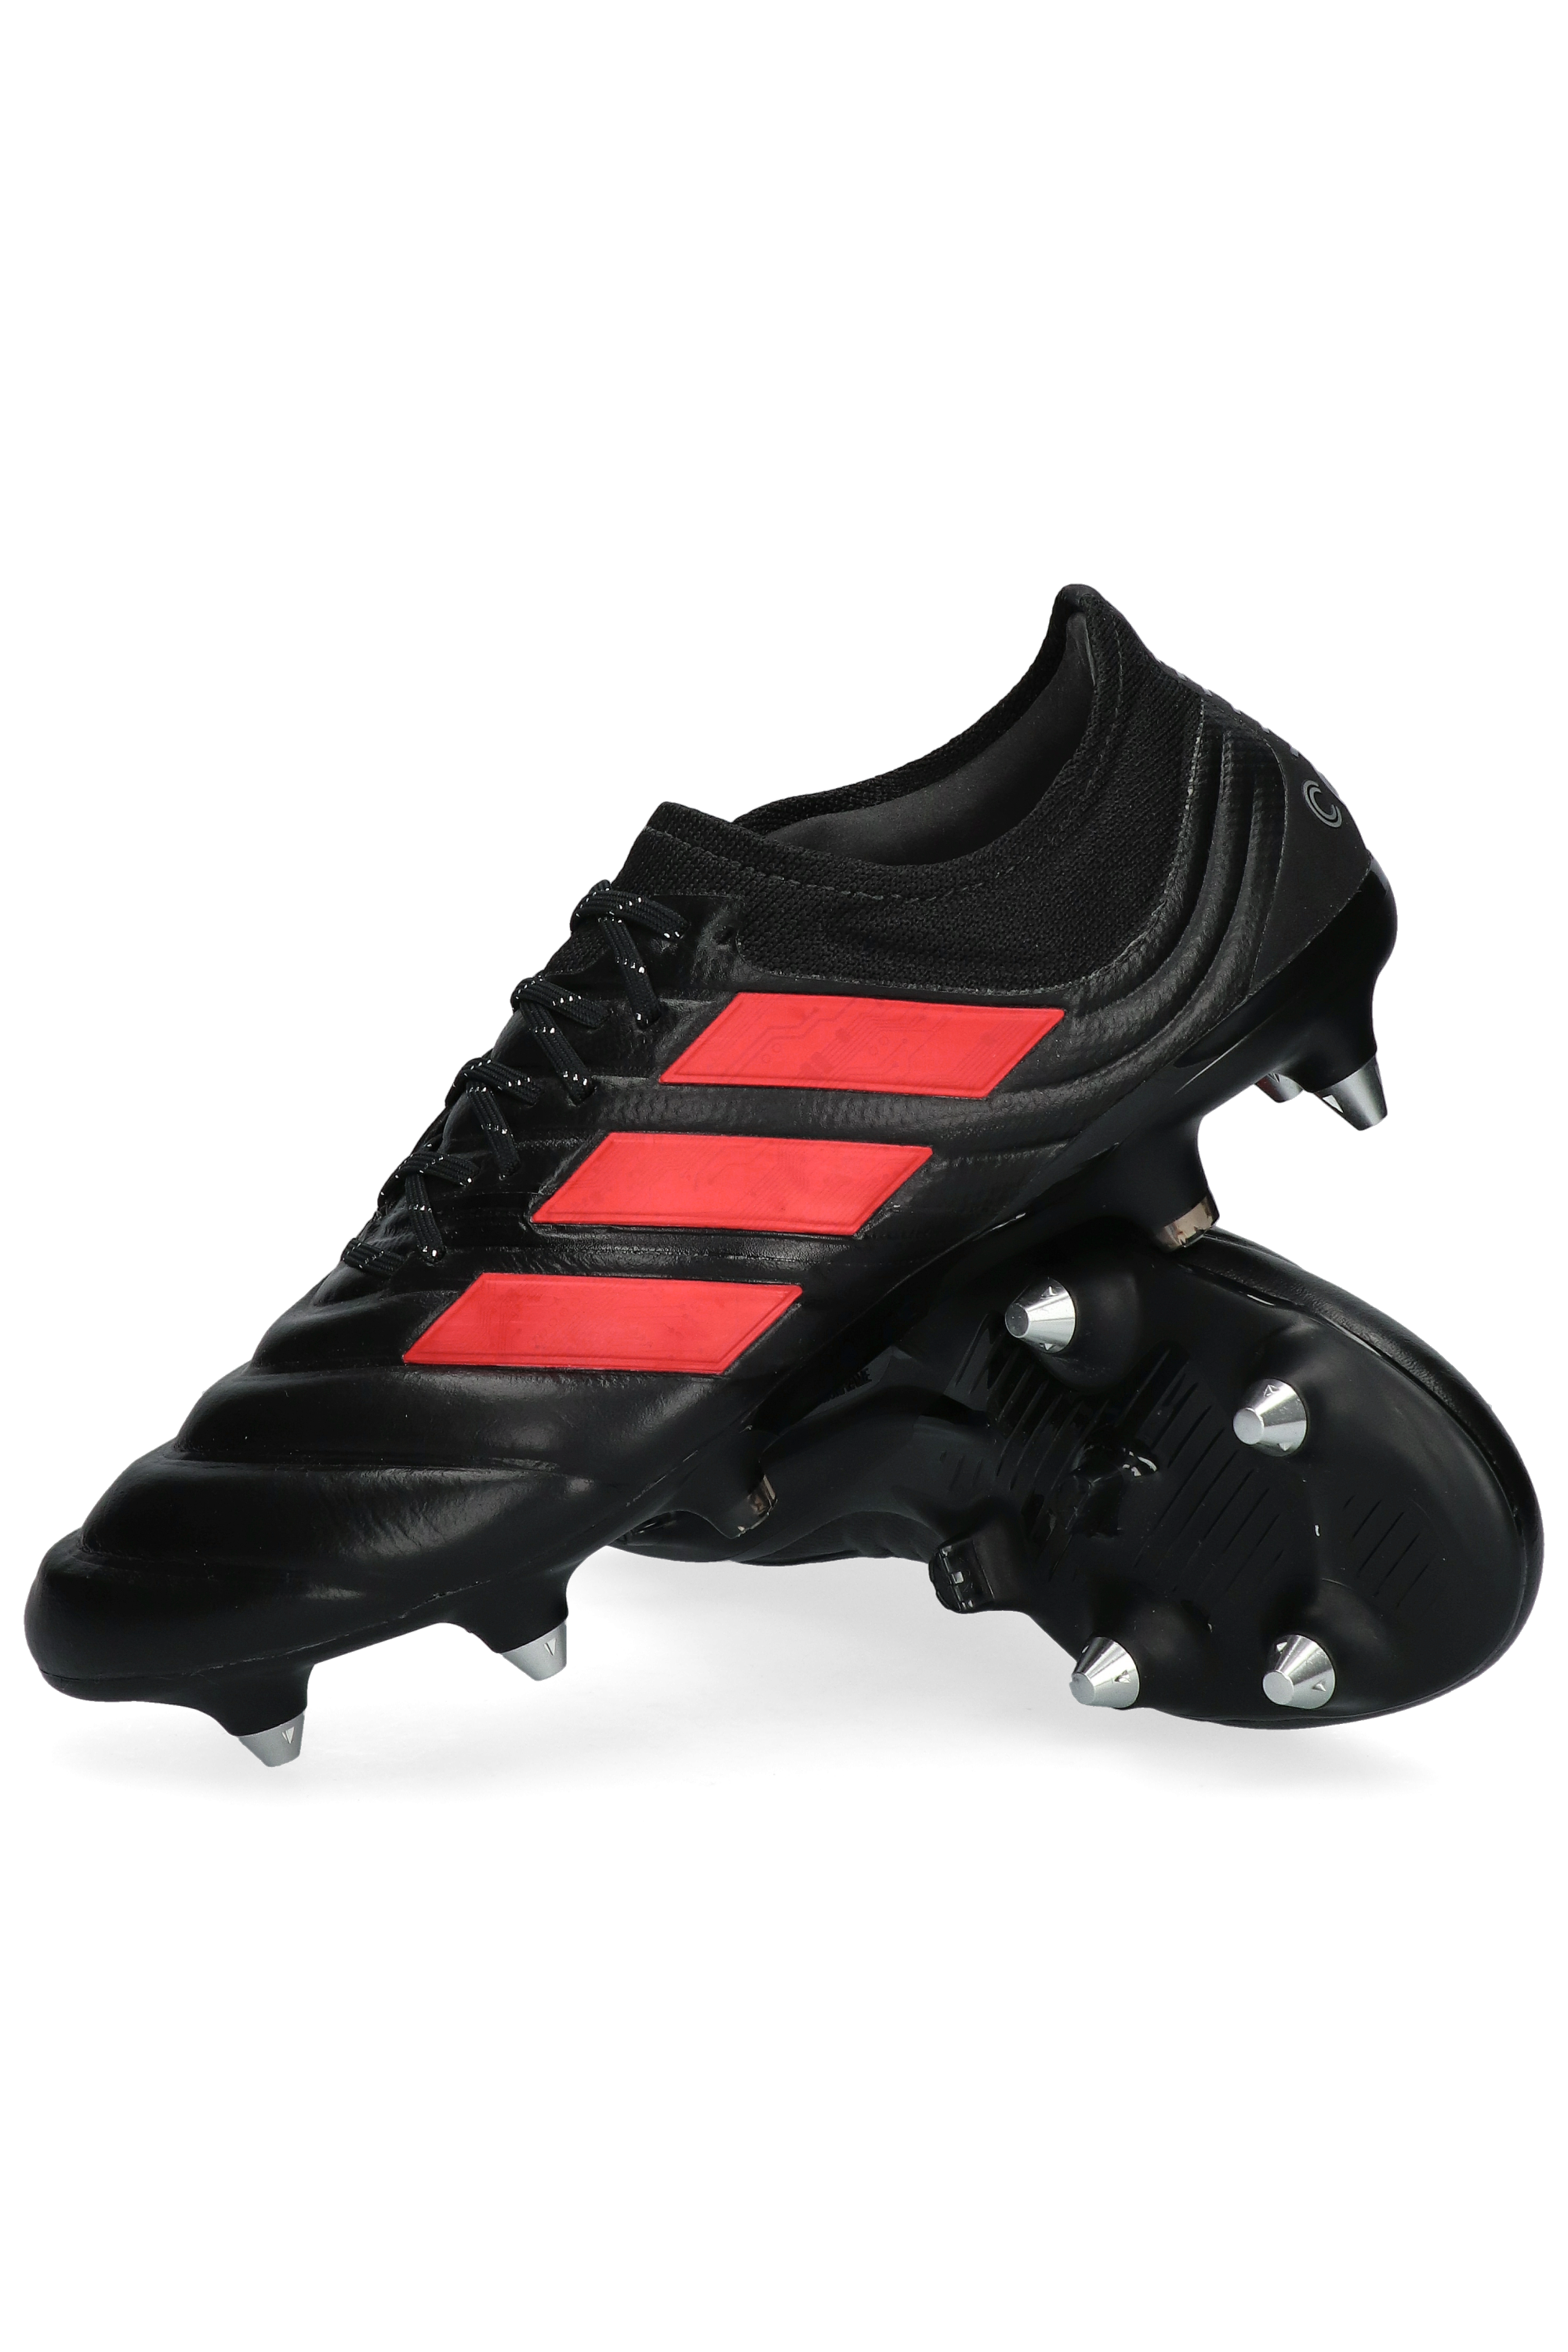 adidas copa 19.1 red